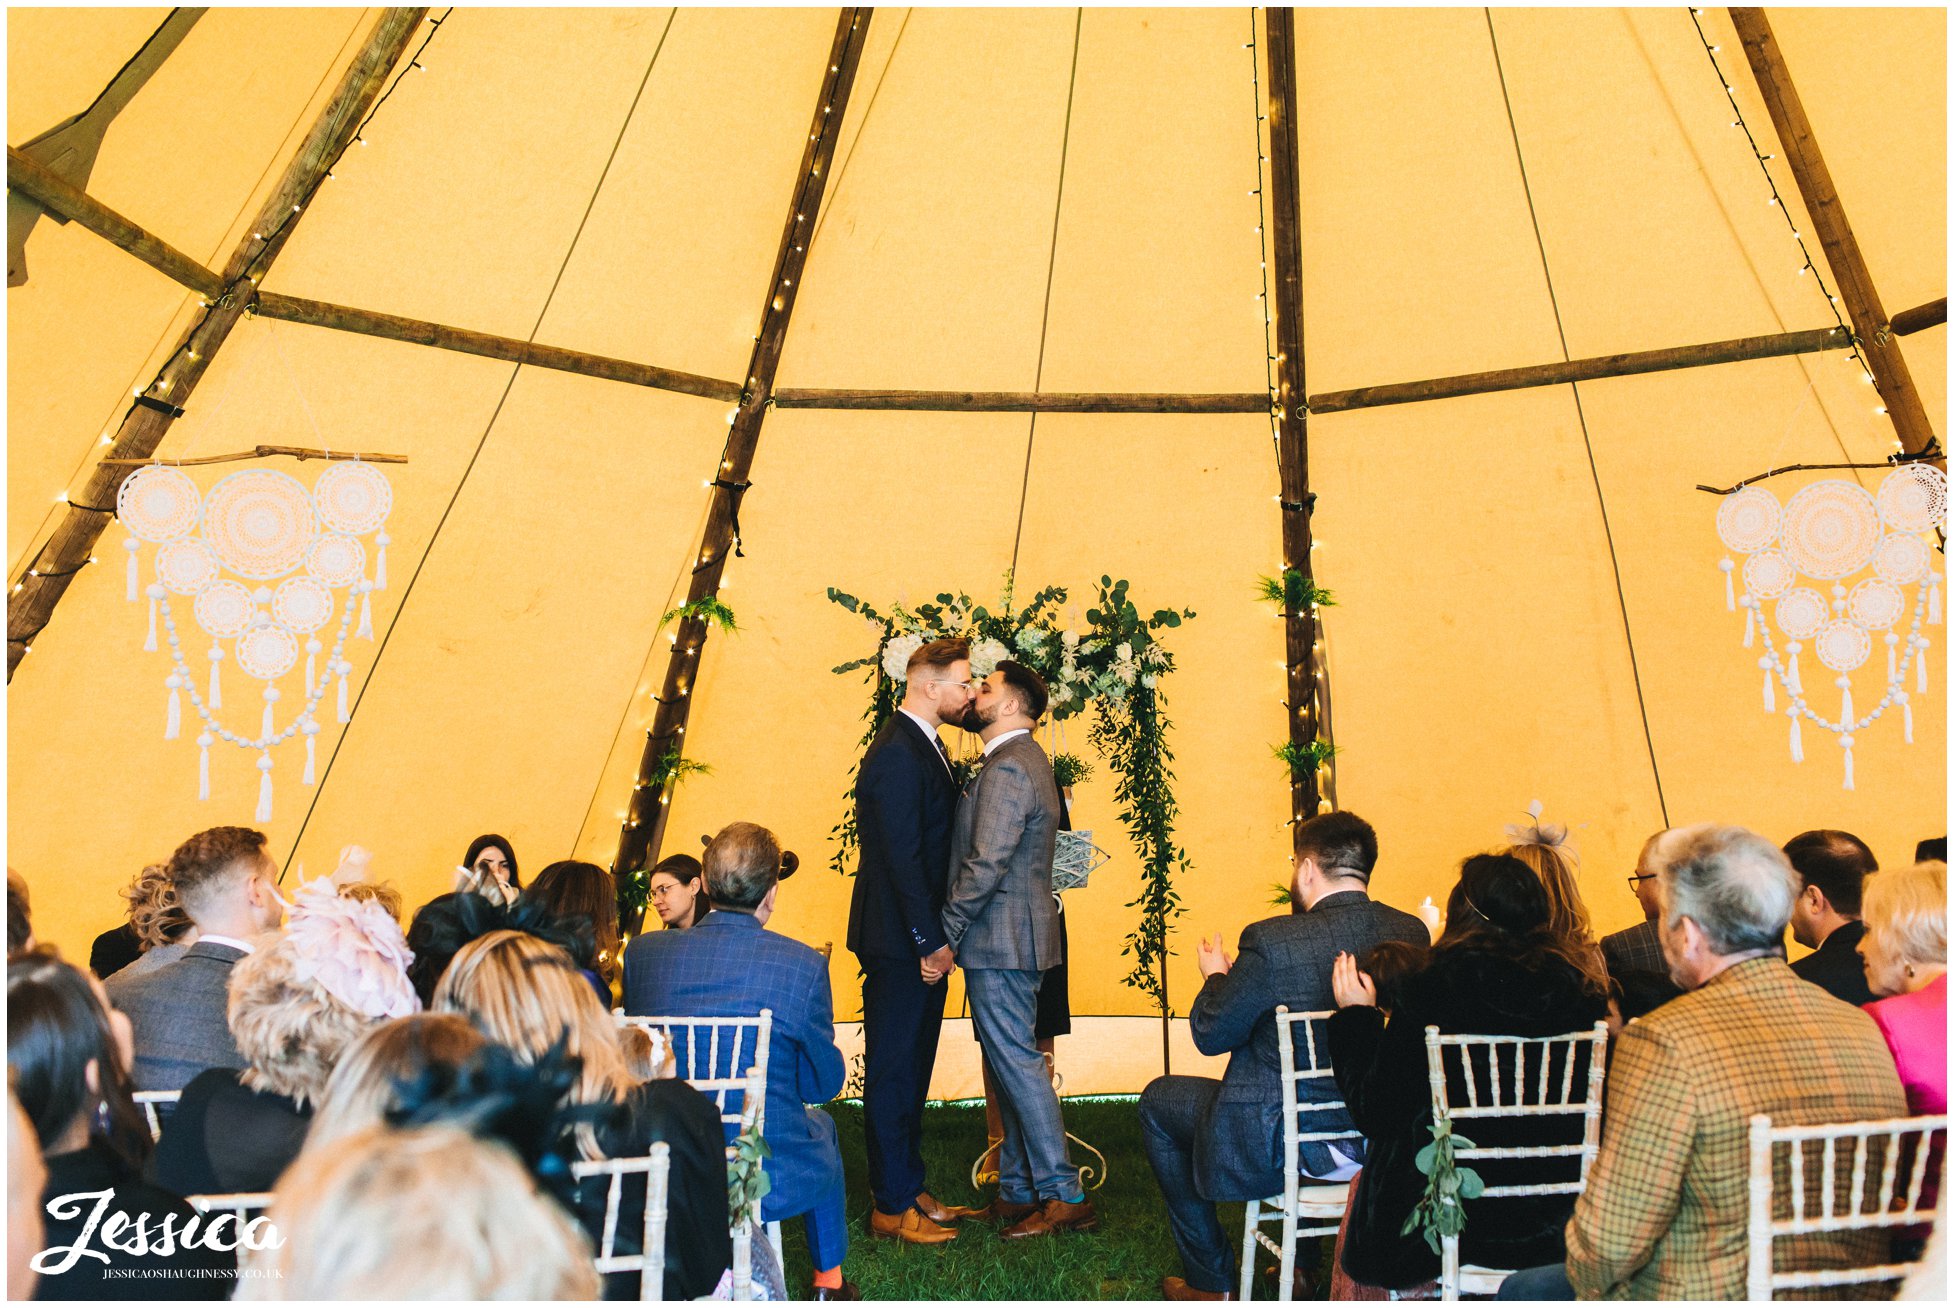 the grooms share their first kiss at the lake district wedding